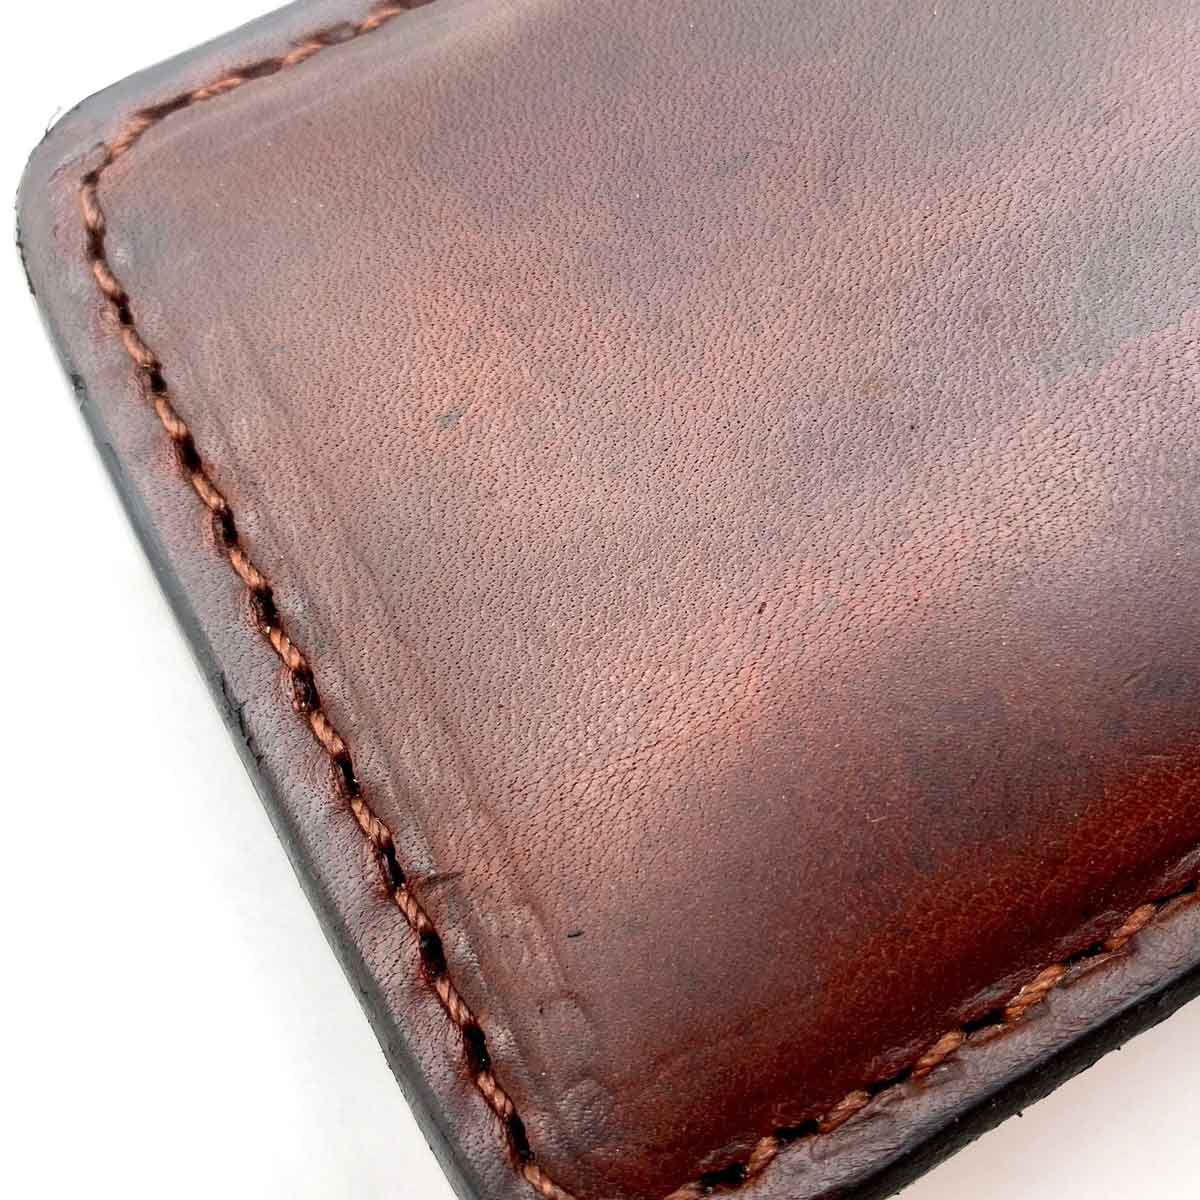 Close up of leather grain and stitching on Mohogany Minimalist wallet